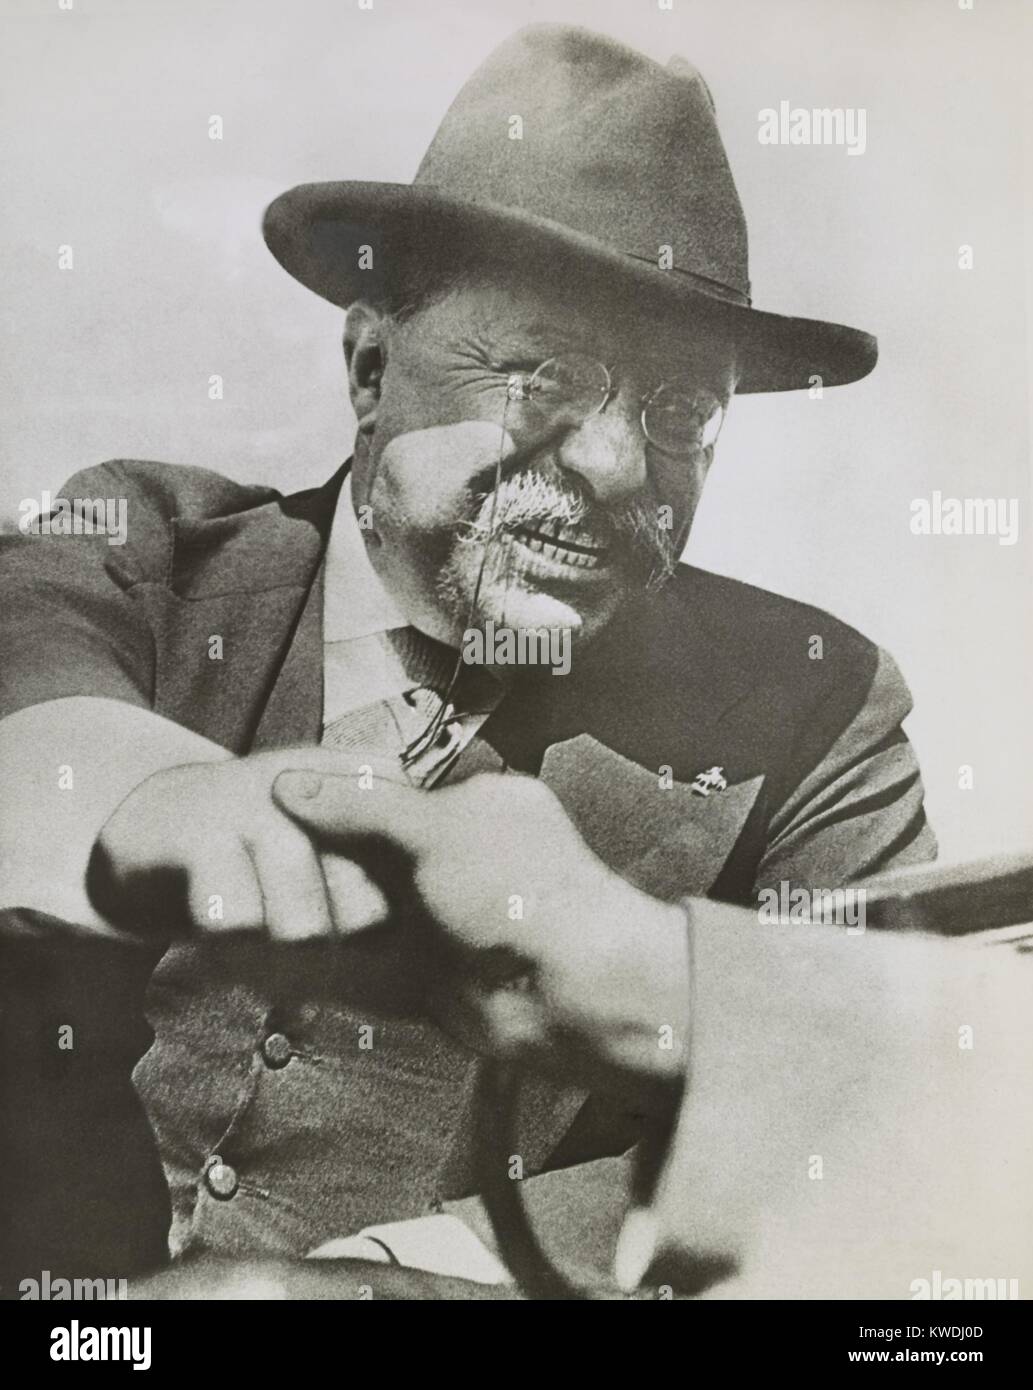 Ex-President Theodore Roosevelt speaking to a crowd in Birmingham, Ala., March 10-12, 1911. TR and Jane Addams addressed the 7th National Child Labor Committee Conference. Photo by Lewis Hine, whose photos documented the plight of child workers (BSLOC 2017 8 30) Stock Photo